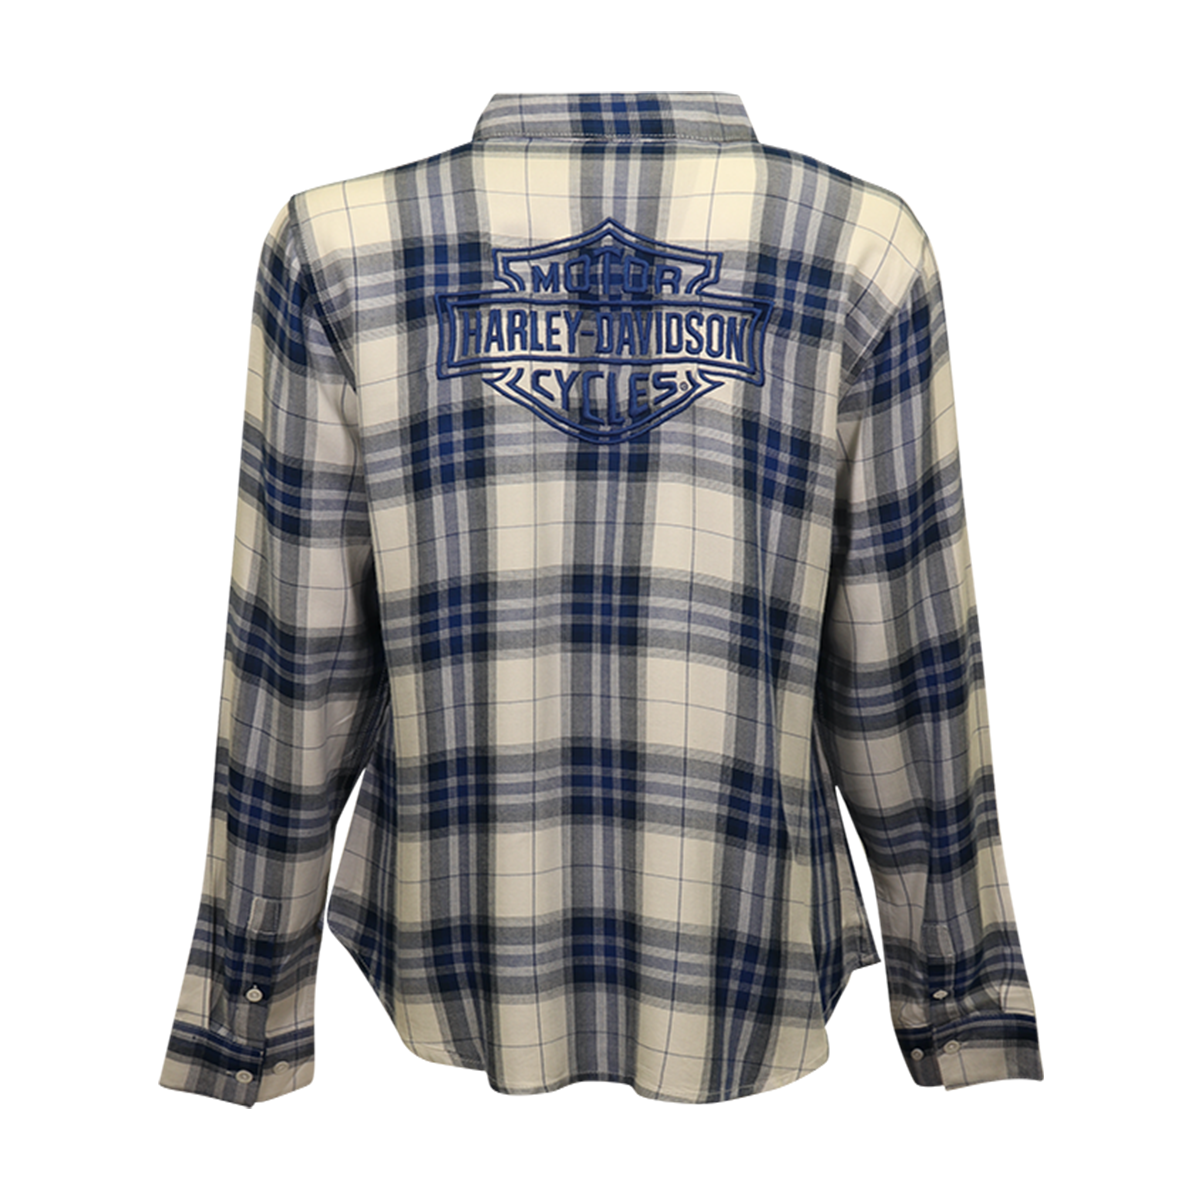 Harley-Davidson Women's Shirt Blue White Plaid Embroidered Text L/S Woven (S22)